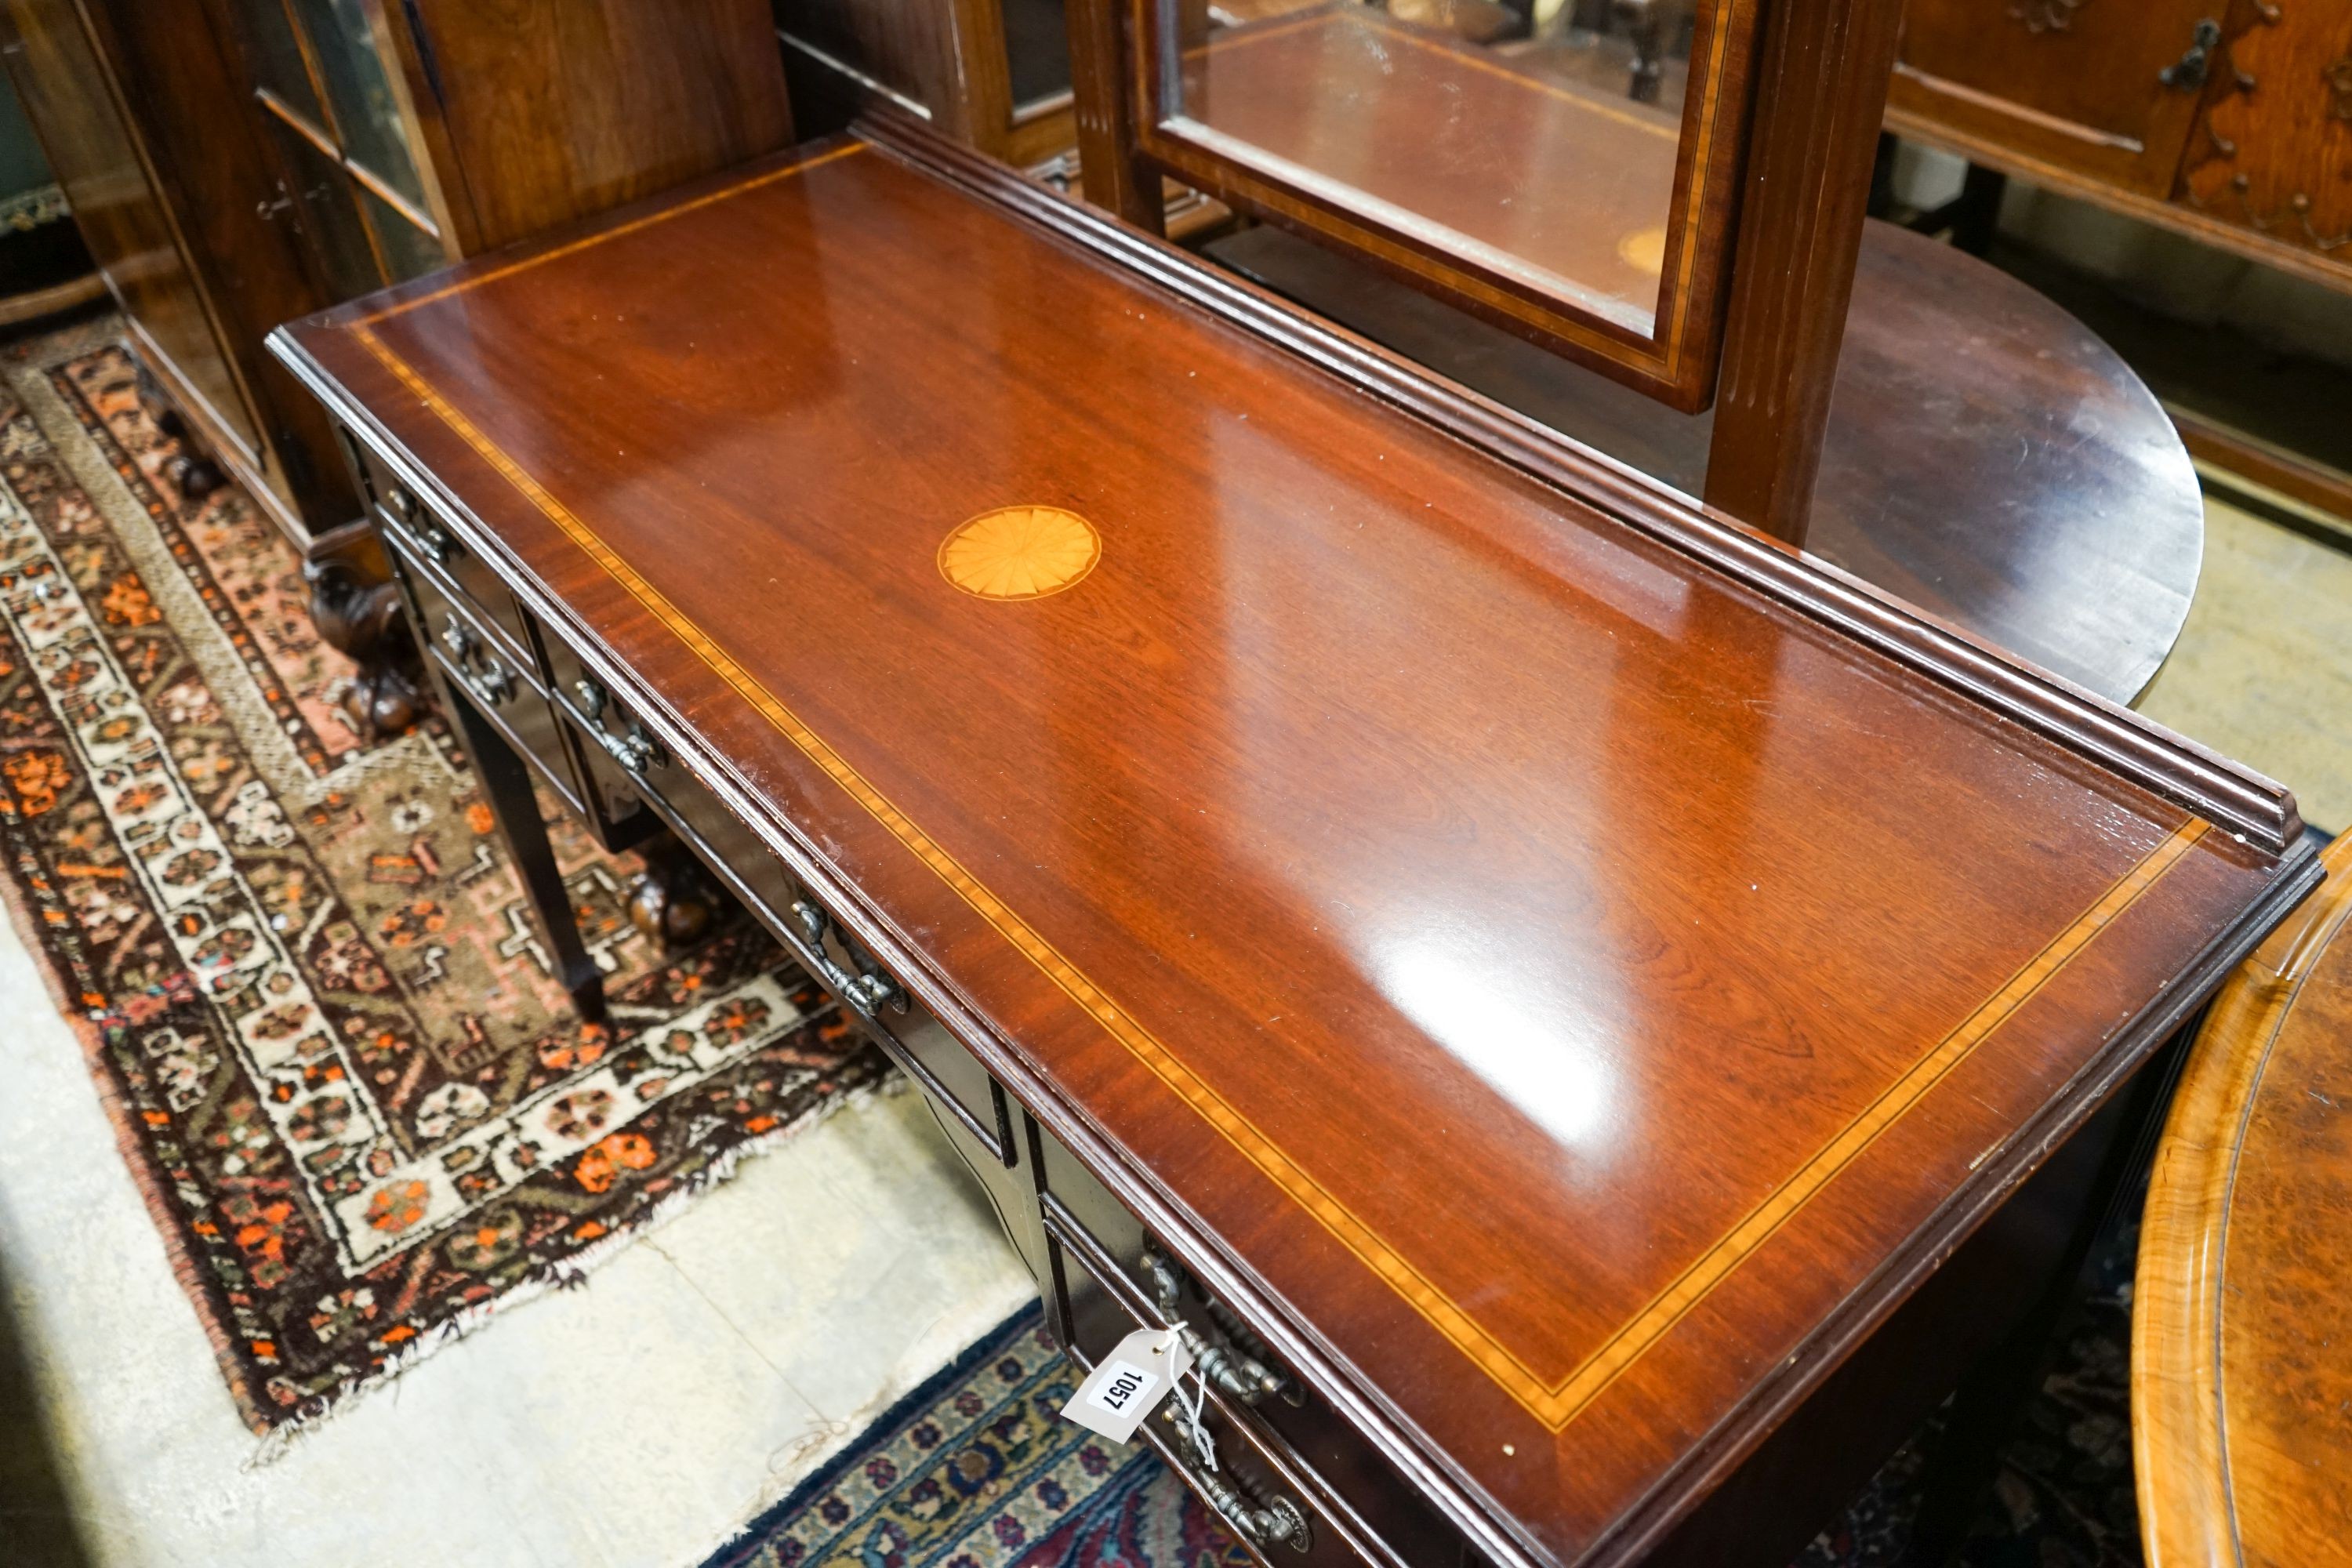 An Edwardian style inlaid mahogany dressing table with swing mirror, length 128cm, depth 54cm, height 158cm